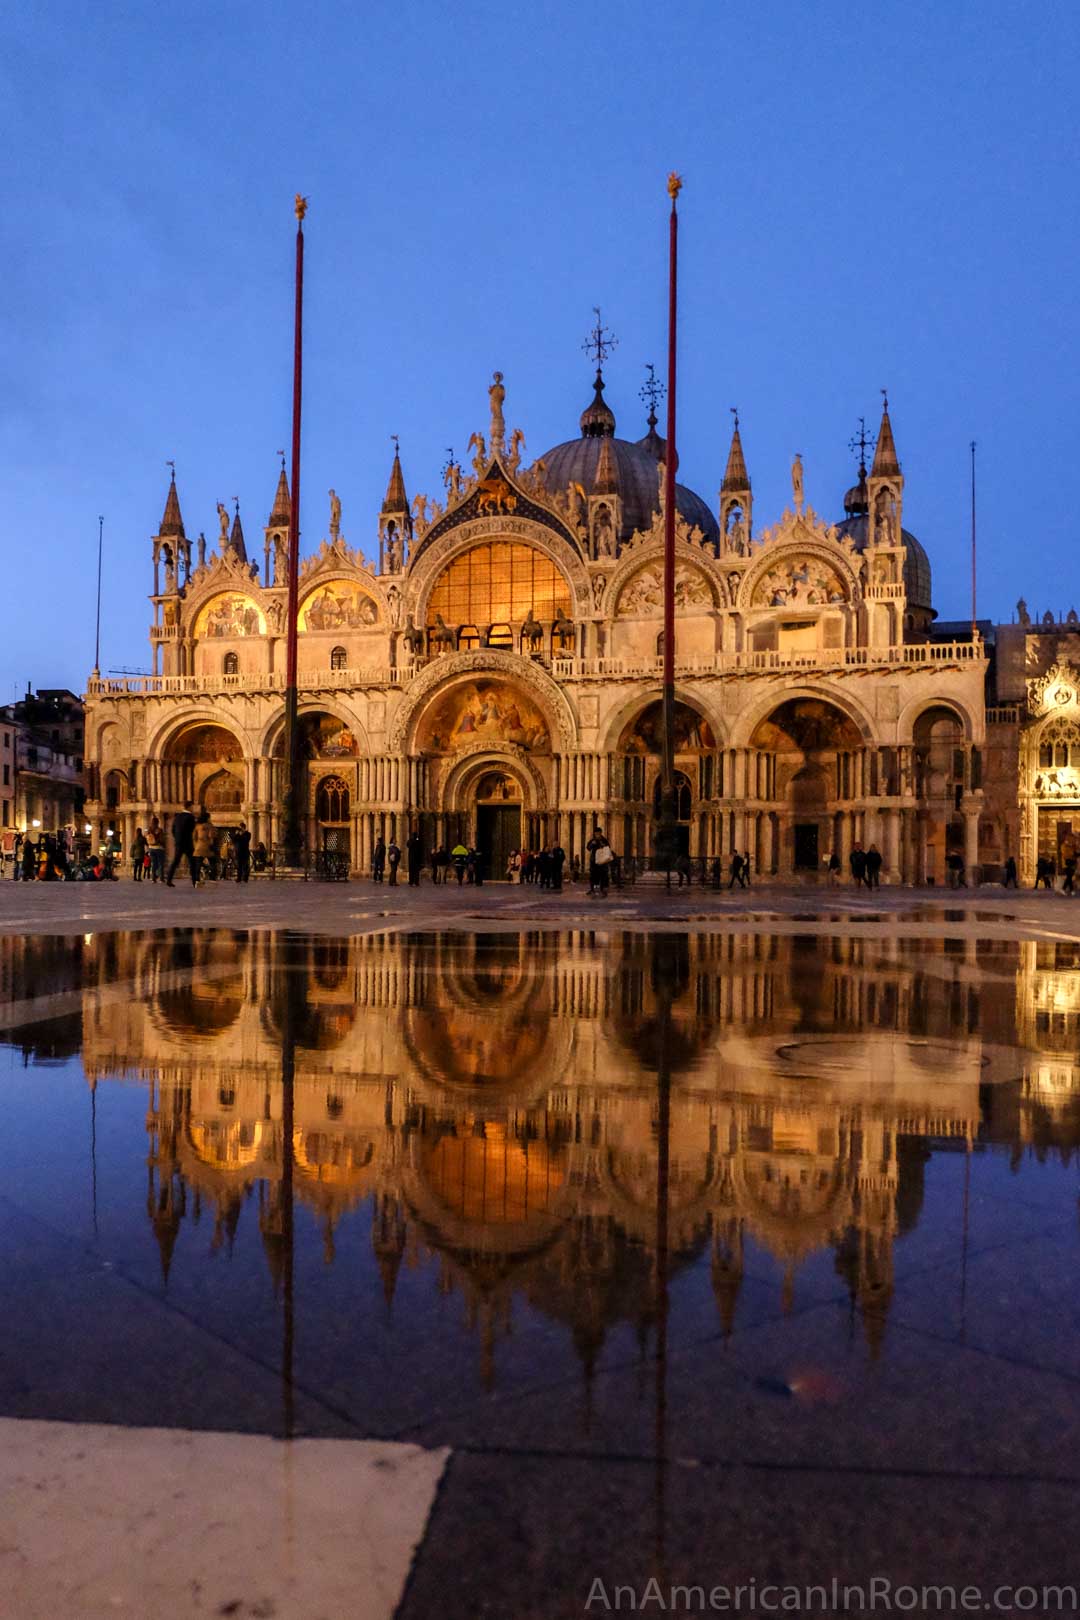 St marks at twilight reflected in water